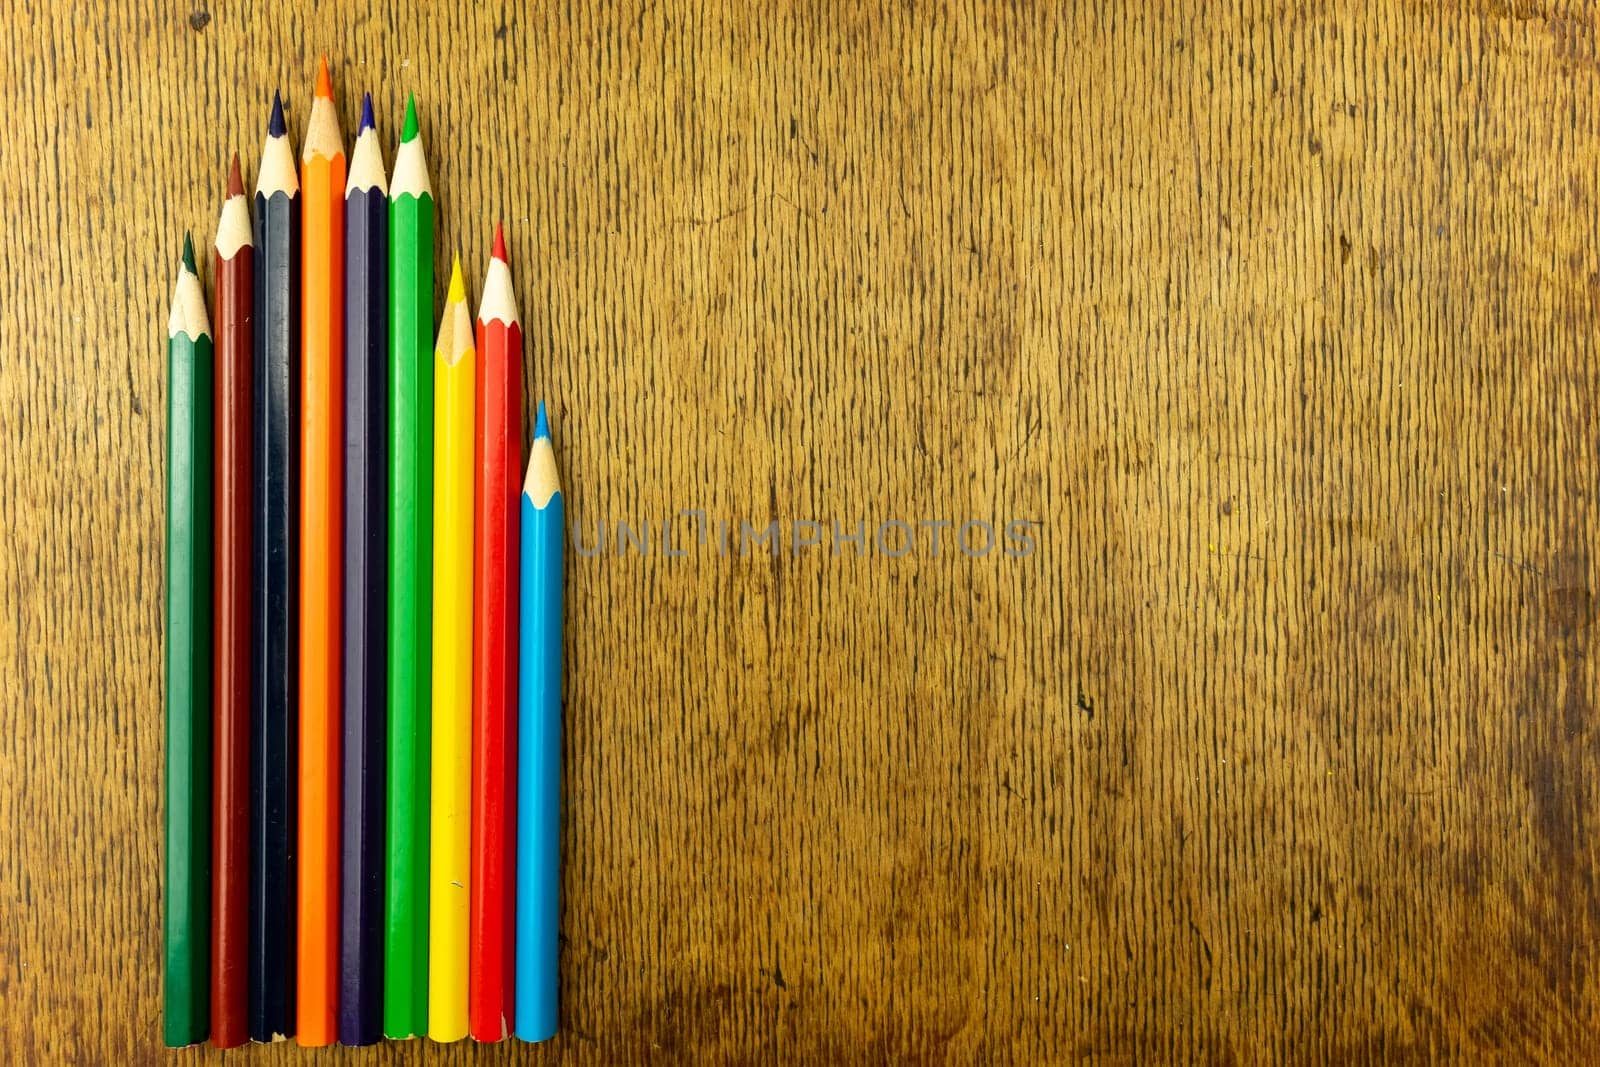 Several colored pencils on a wooden background. Copy space by Serhii_Voroshchuk